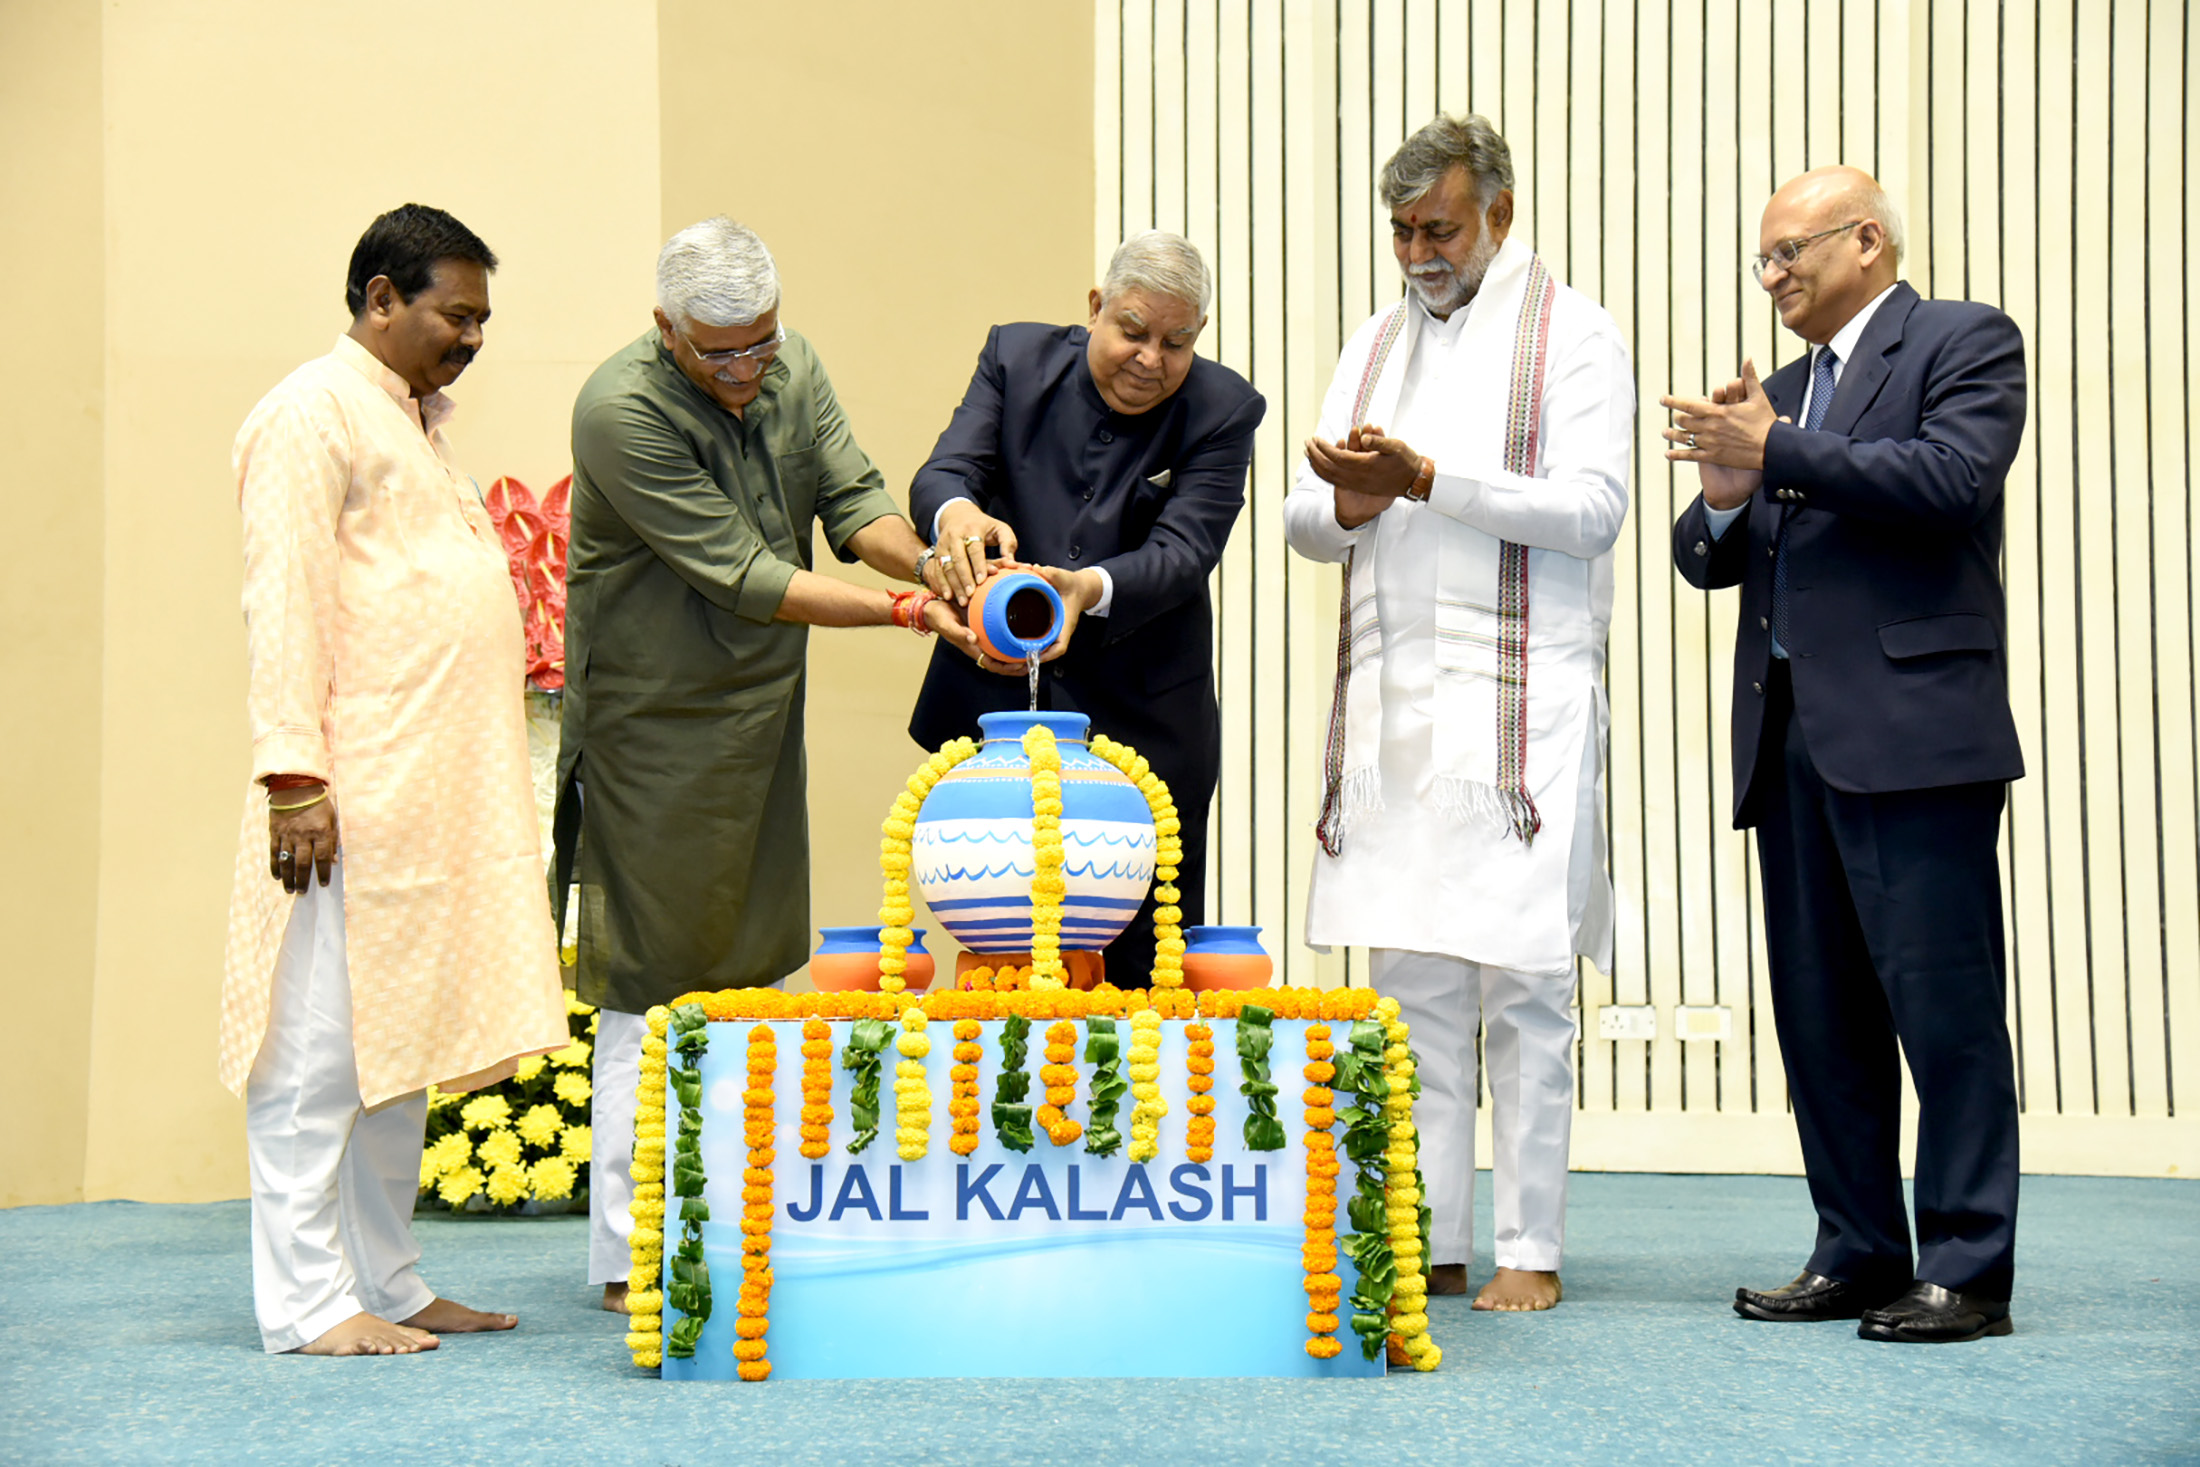 The Vice President, Shri Jagdeep Dhankhar inaugurating the 4th National Water Awards ceremony with a symbolic Jal Kalash ceremony at Vigyan Bhawan in New Delhi on June 17, 2023.